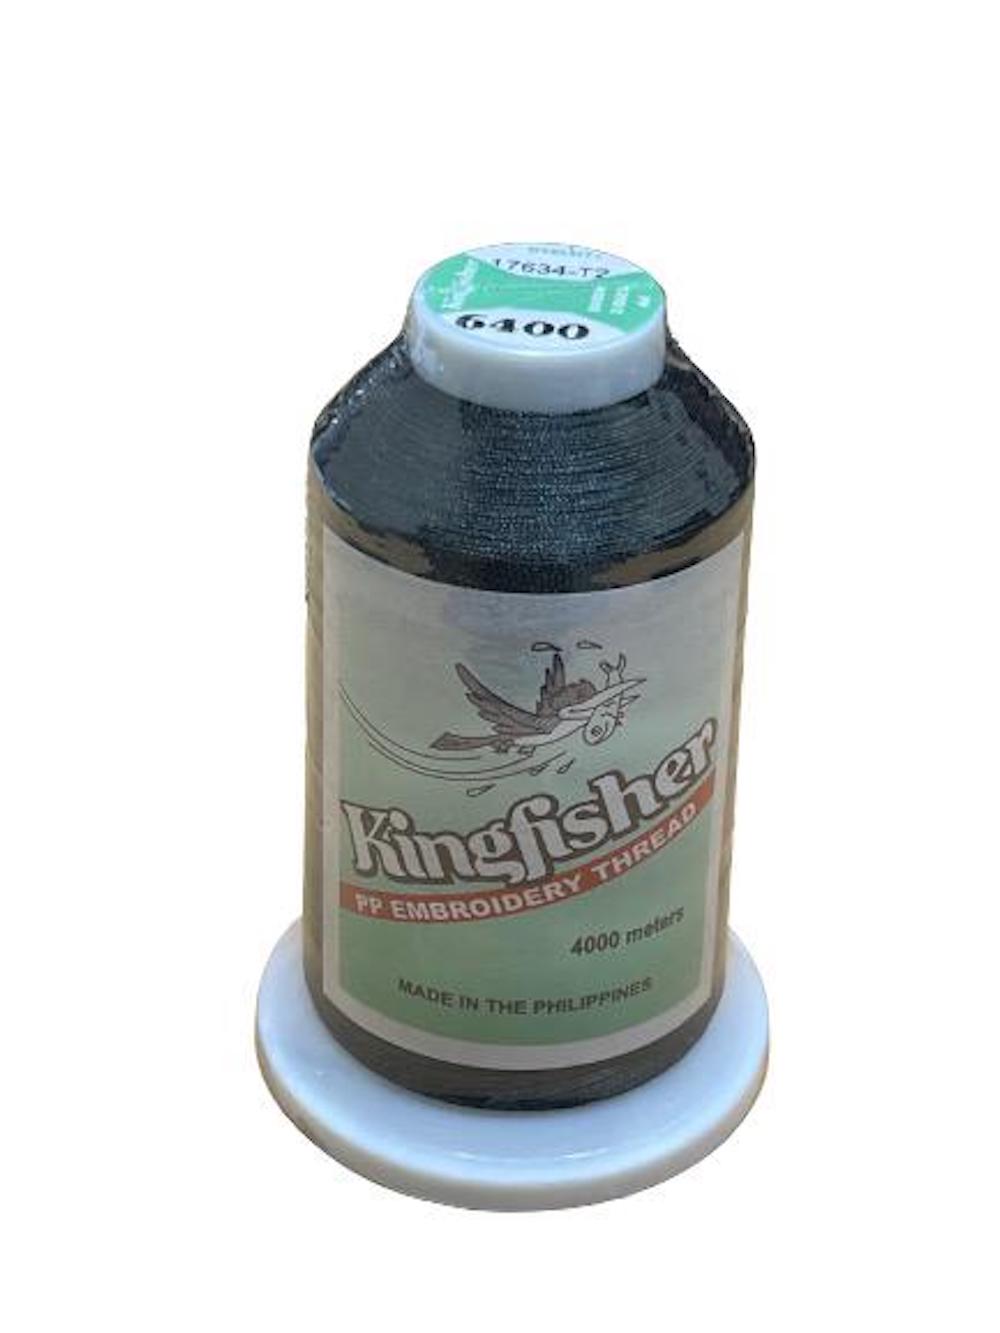 King Fisher Embroidery Thread 4000m 6400 - MY SEWING MALL